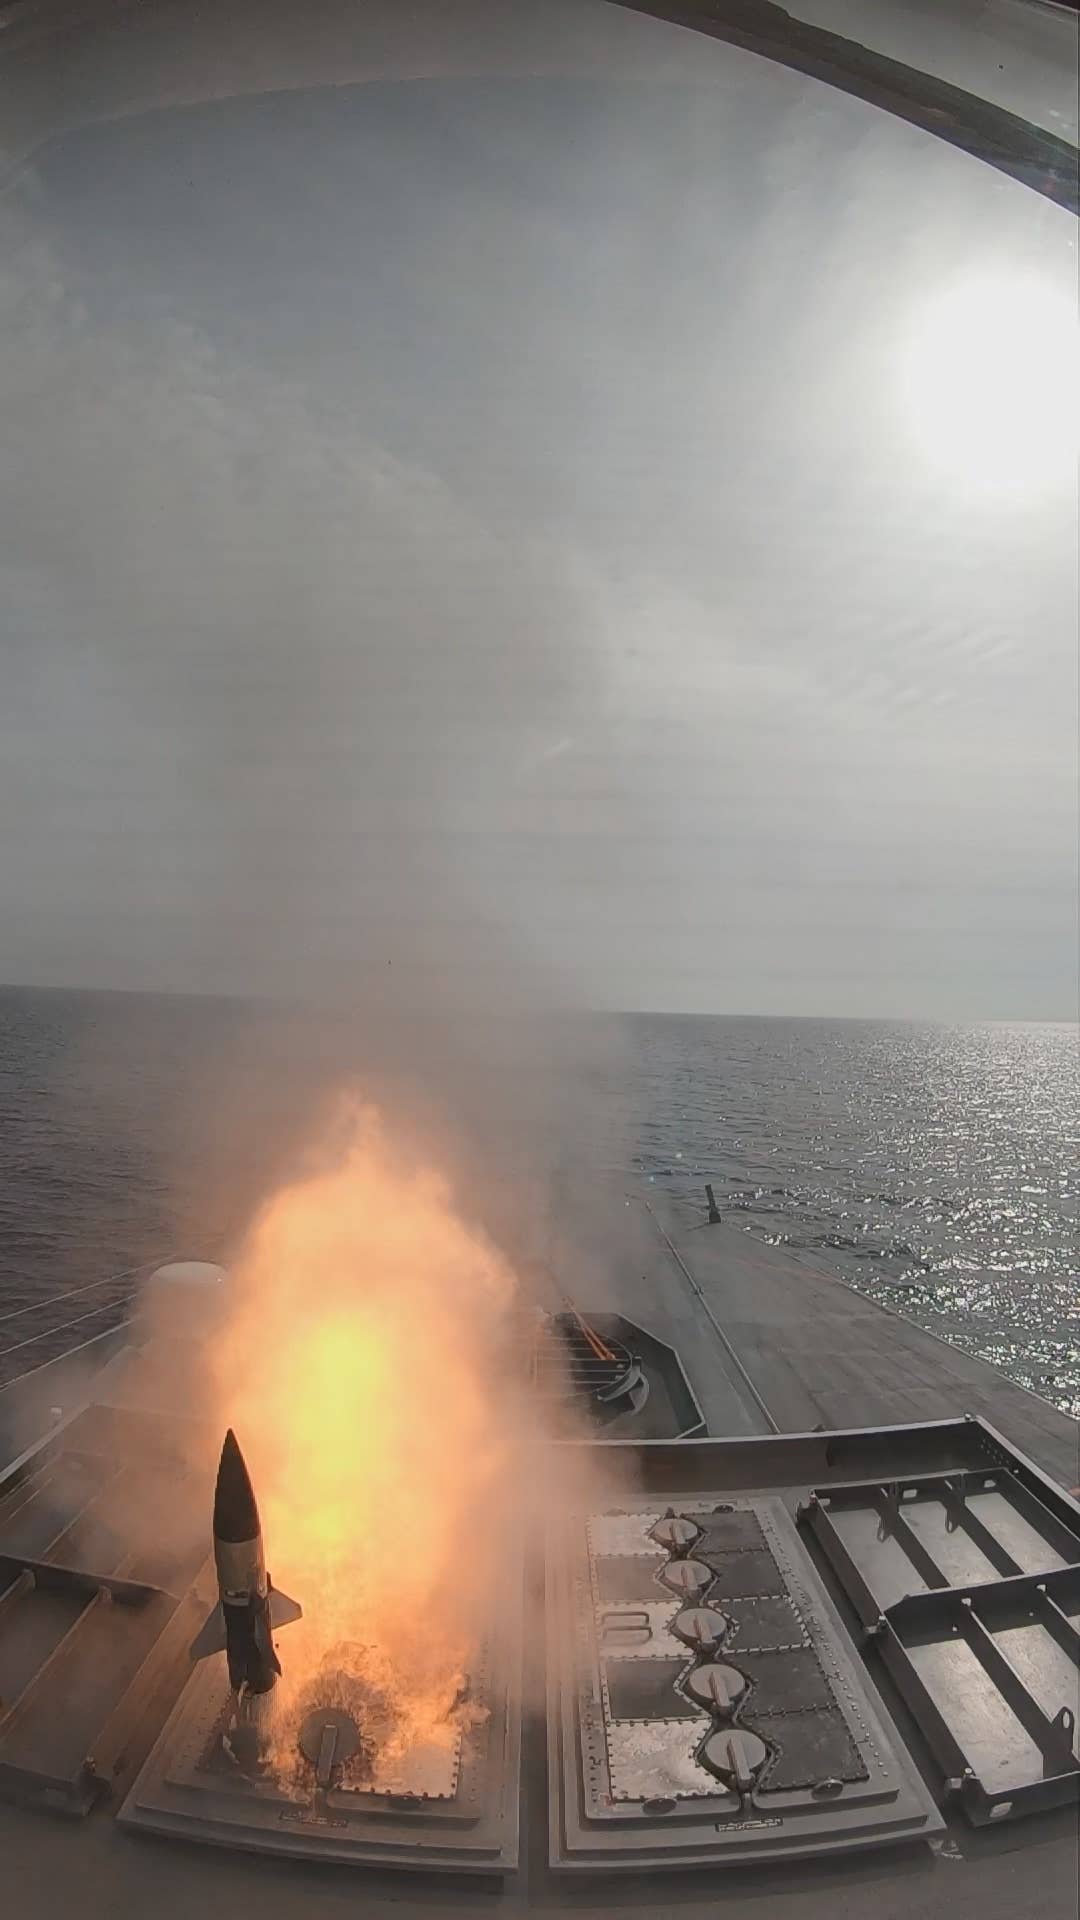 A Barak-8 missile is launched from a <em>Sa’ar 6</em>&nbsp;class corvette during live-fire tests. <em>Photo by Israeli Ministry of Defense/Anadolu Agency via Getty Images</em>